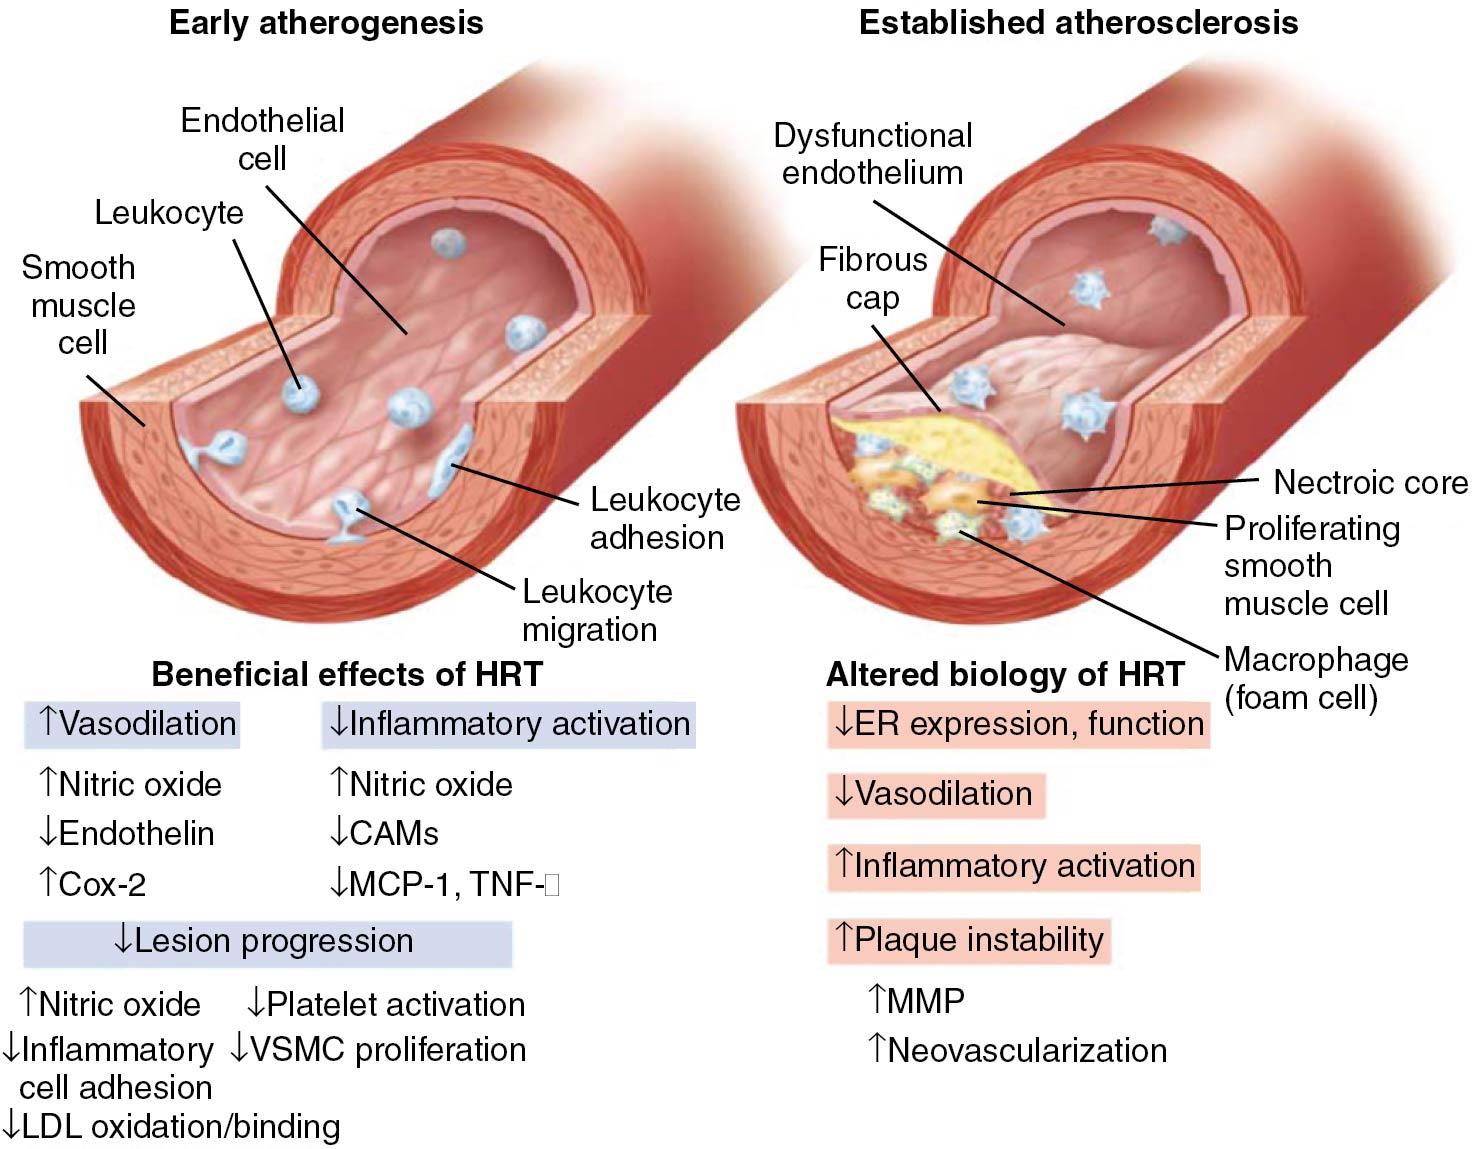 Fig. 14.24, Mechanisms of benefit of hormonal therapy with estrogen in early menopause (relatively clean coronary vessels) and the lack of effect in older women and those with significant atherosclerotic plaque burden. CAM, Cellular adhesion molecule; Cox-2, cyclooxygenase 2; ER, estrogen receptor; HRT, hormone replacement therapy; LDL, low-density lipoprotein; MCP-1, Macrophage chemoattractant protein -1; MMP, matrix metalloproteinase; TNF-α, tumor necrosis factor alpha; VSMC, vascular smooth muscle cell.